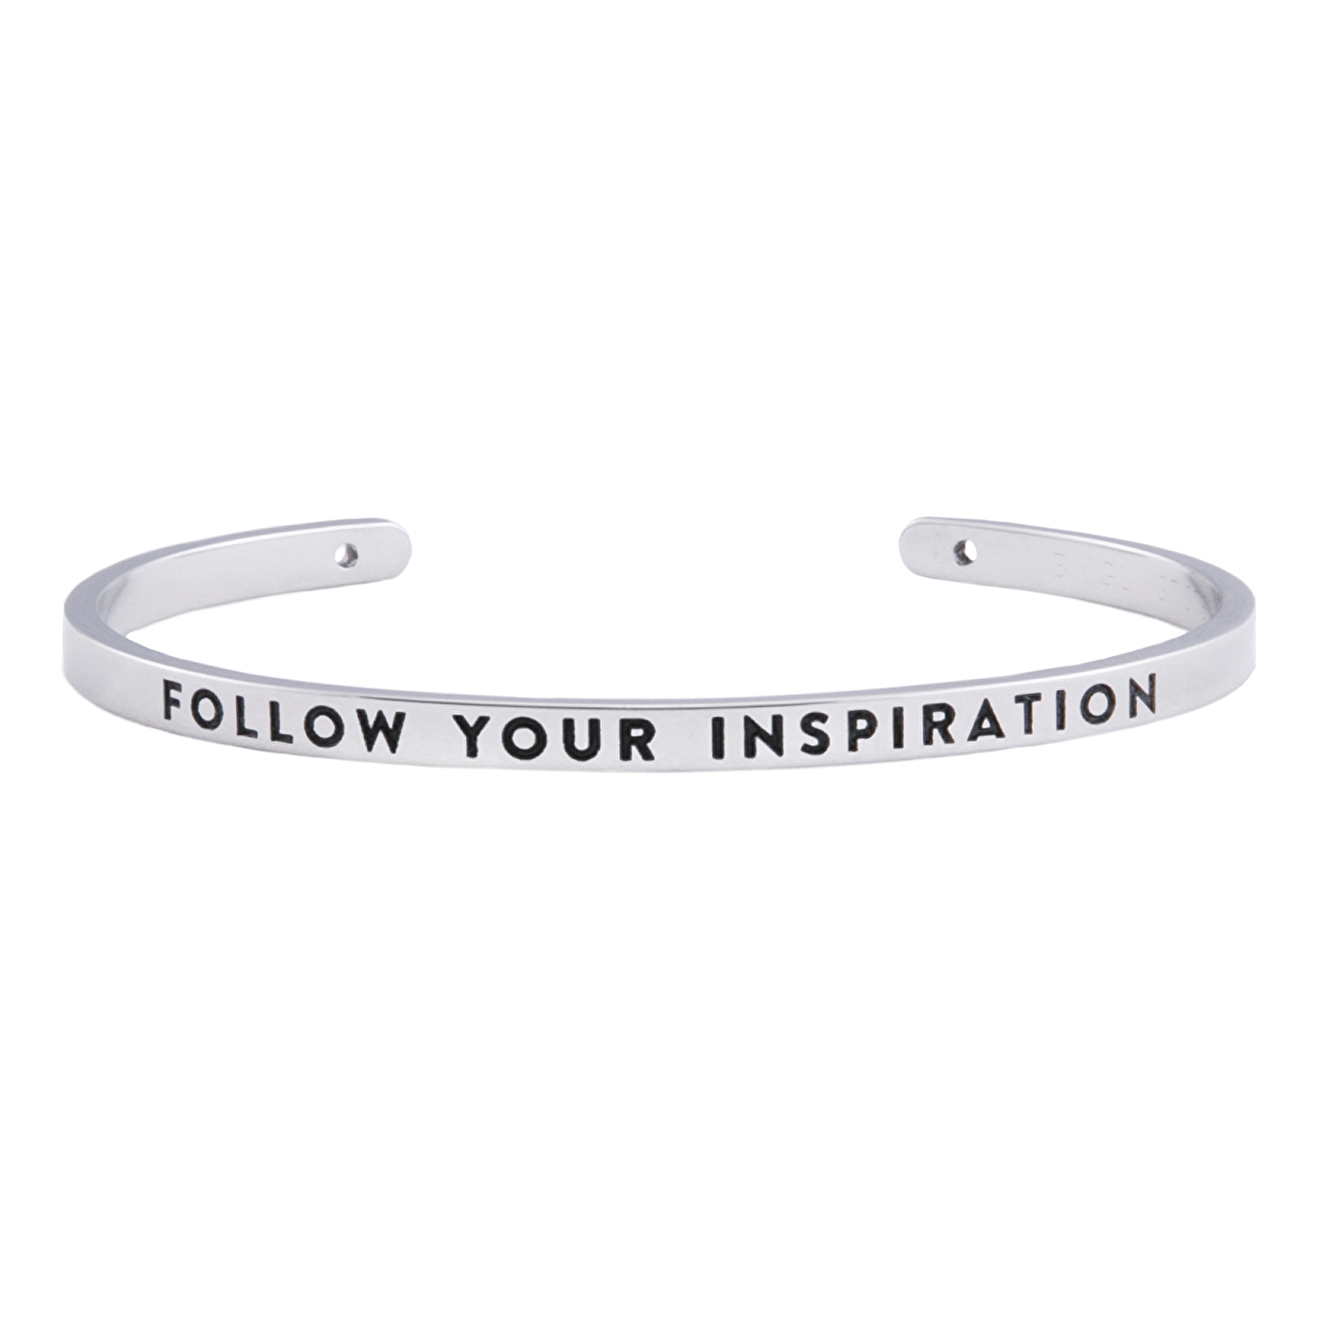 BNGL браслет FOLLOW YOUR INSPIRATION bngl браслет follow your heart